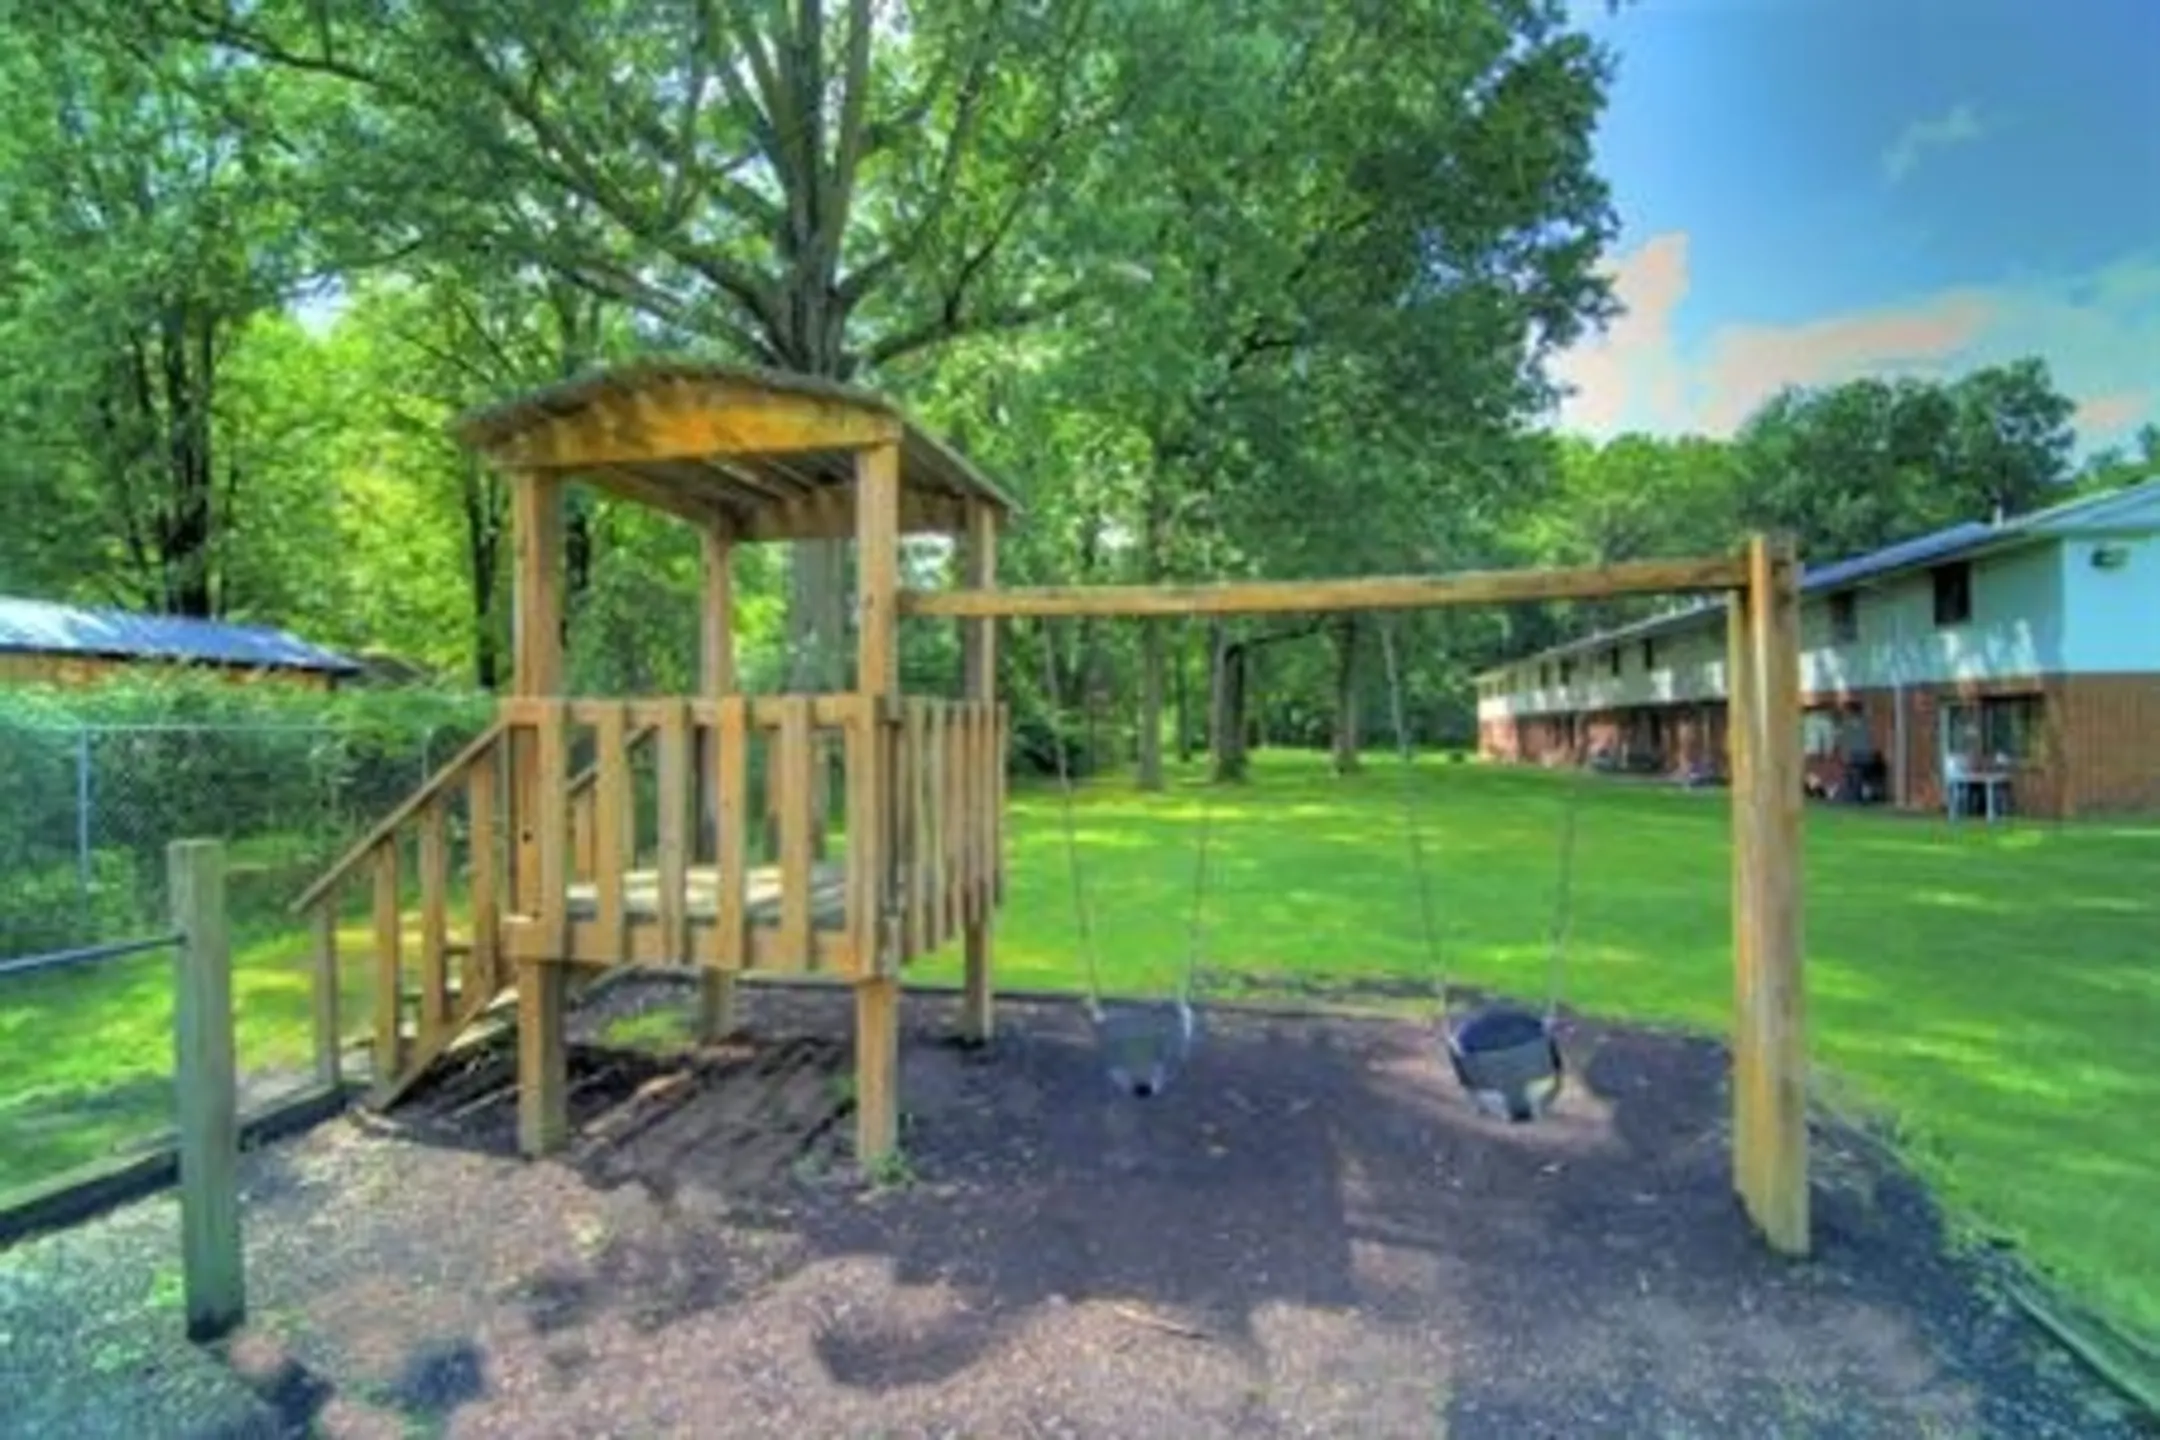 Playground - Bellair Apartments - Niles, OH